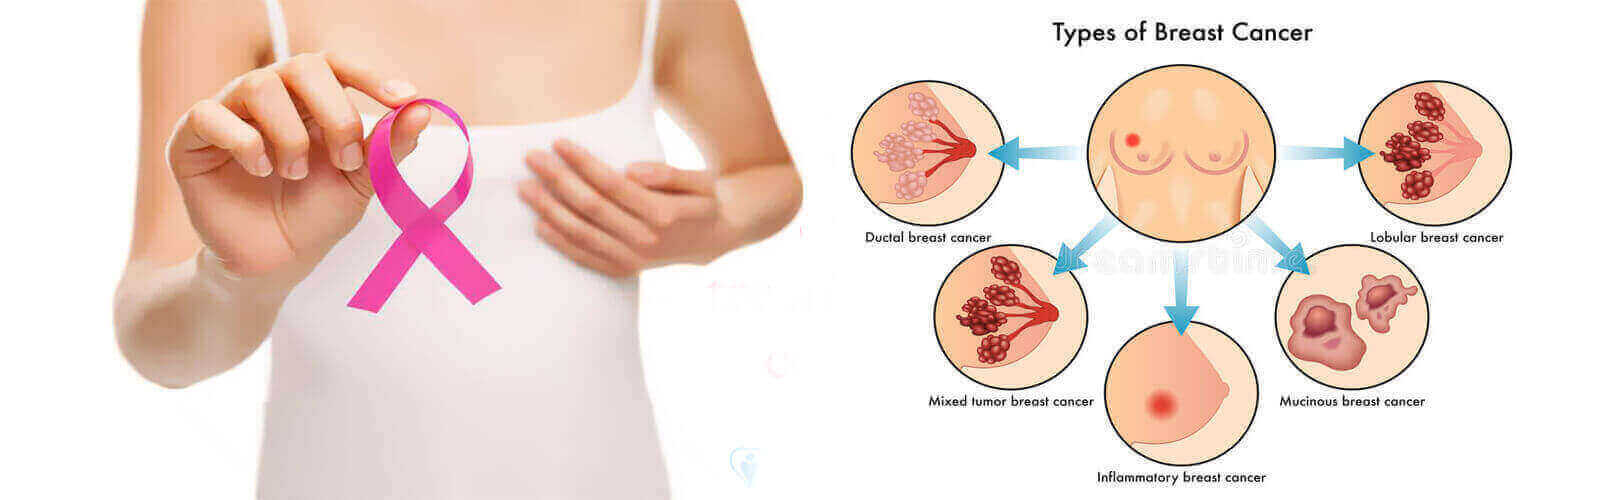 Breast Cancer Treatment in United States